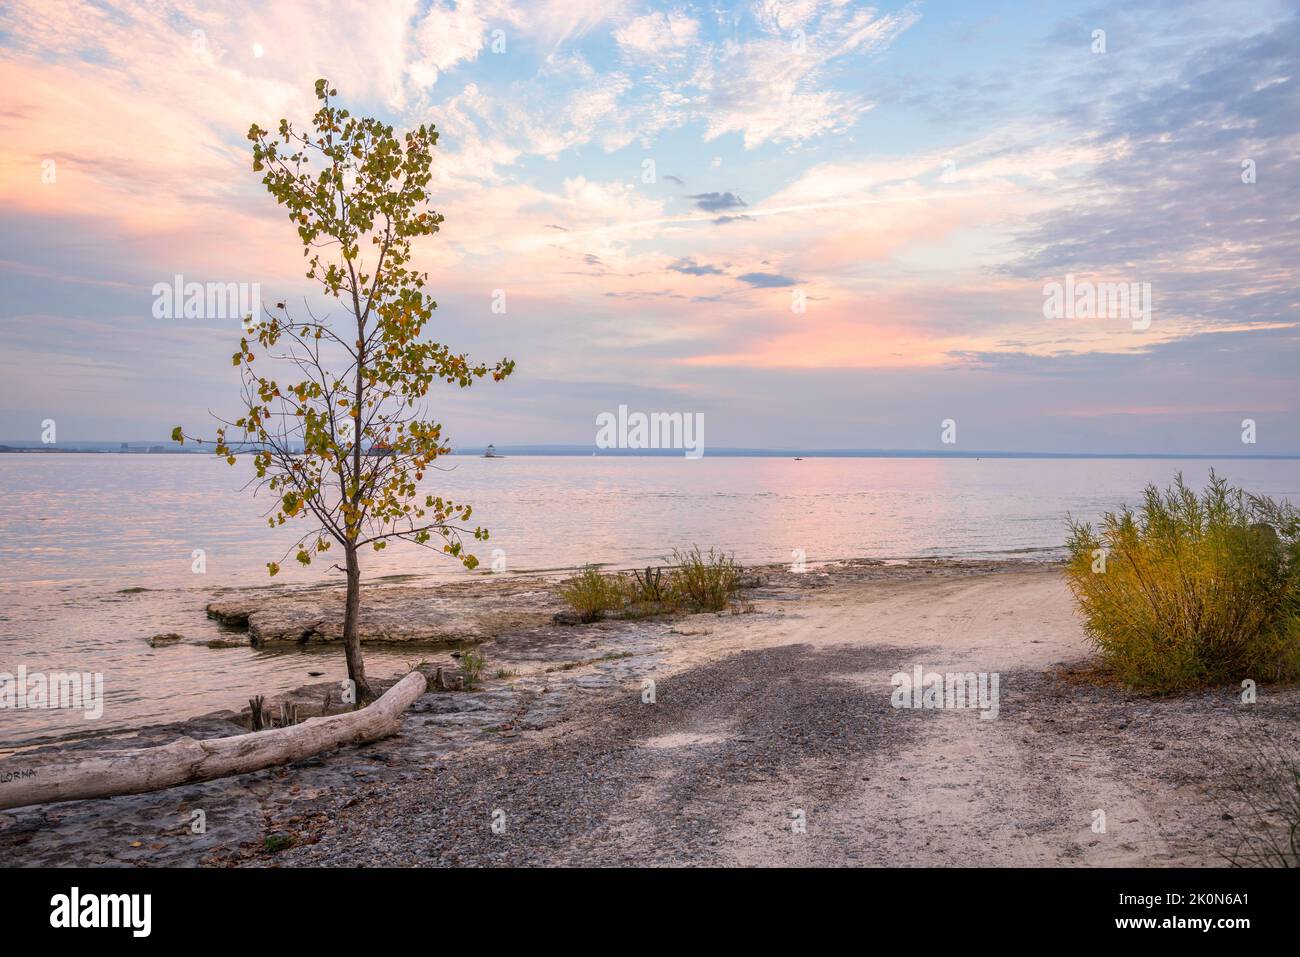 Majestic autumn sunset over an empty beach on a lake in autumn. Lake Eire, Canada. Stock Photo